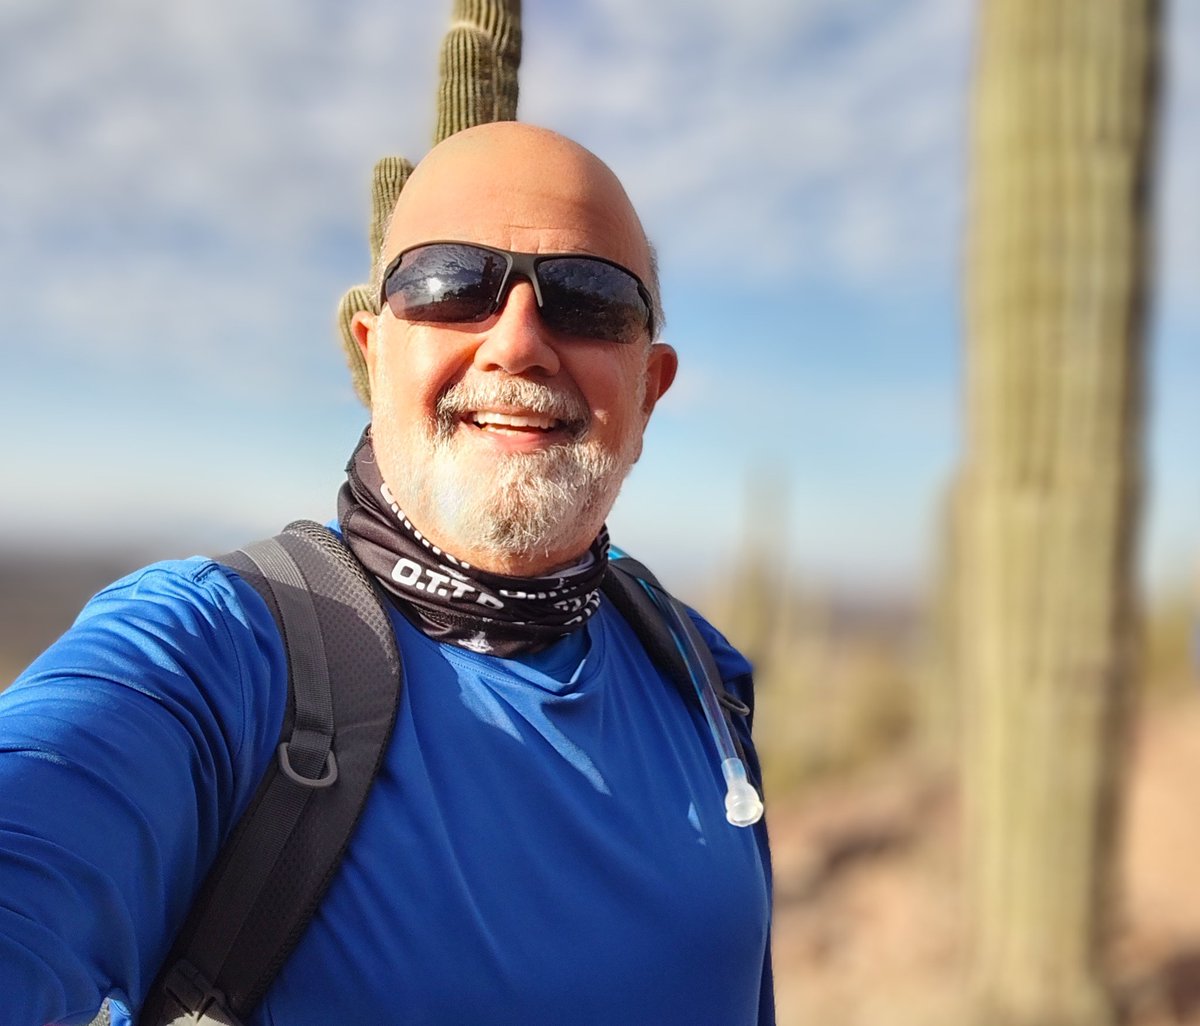 Excellent holiday hiking in the Sonoran Desert of Arizona USA.
#armaskin #flipsockz #grtfulivingllc